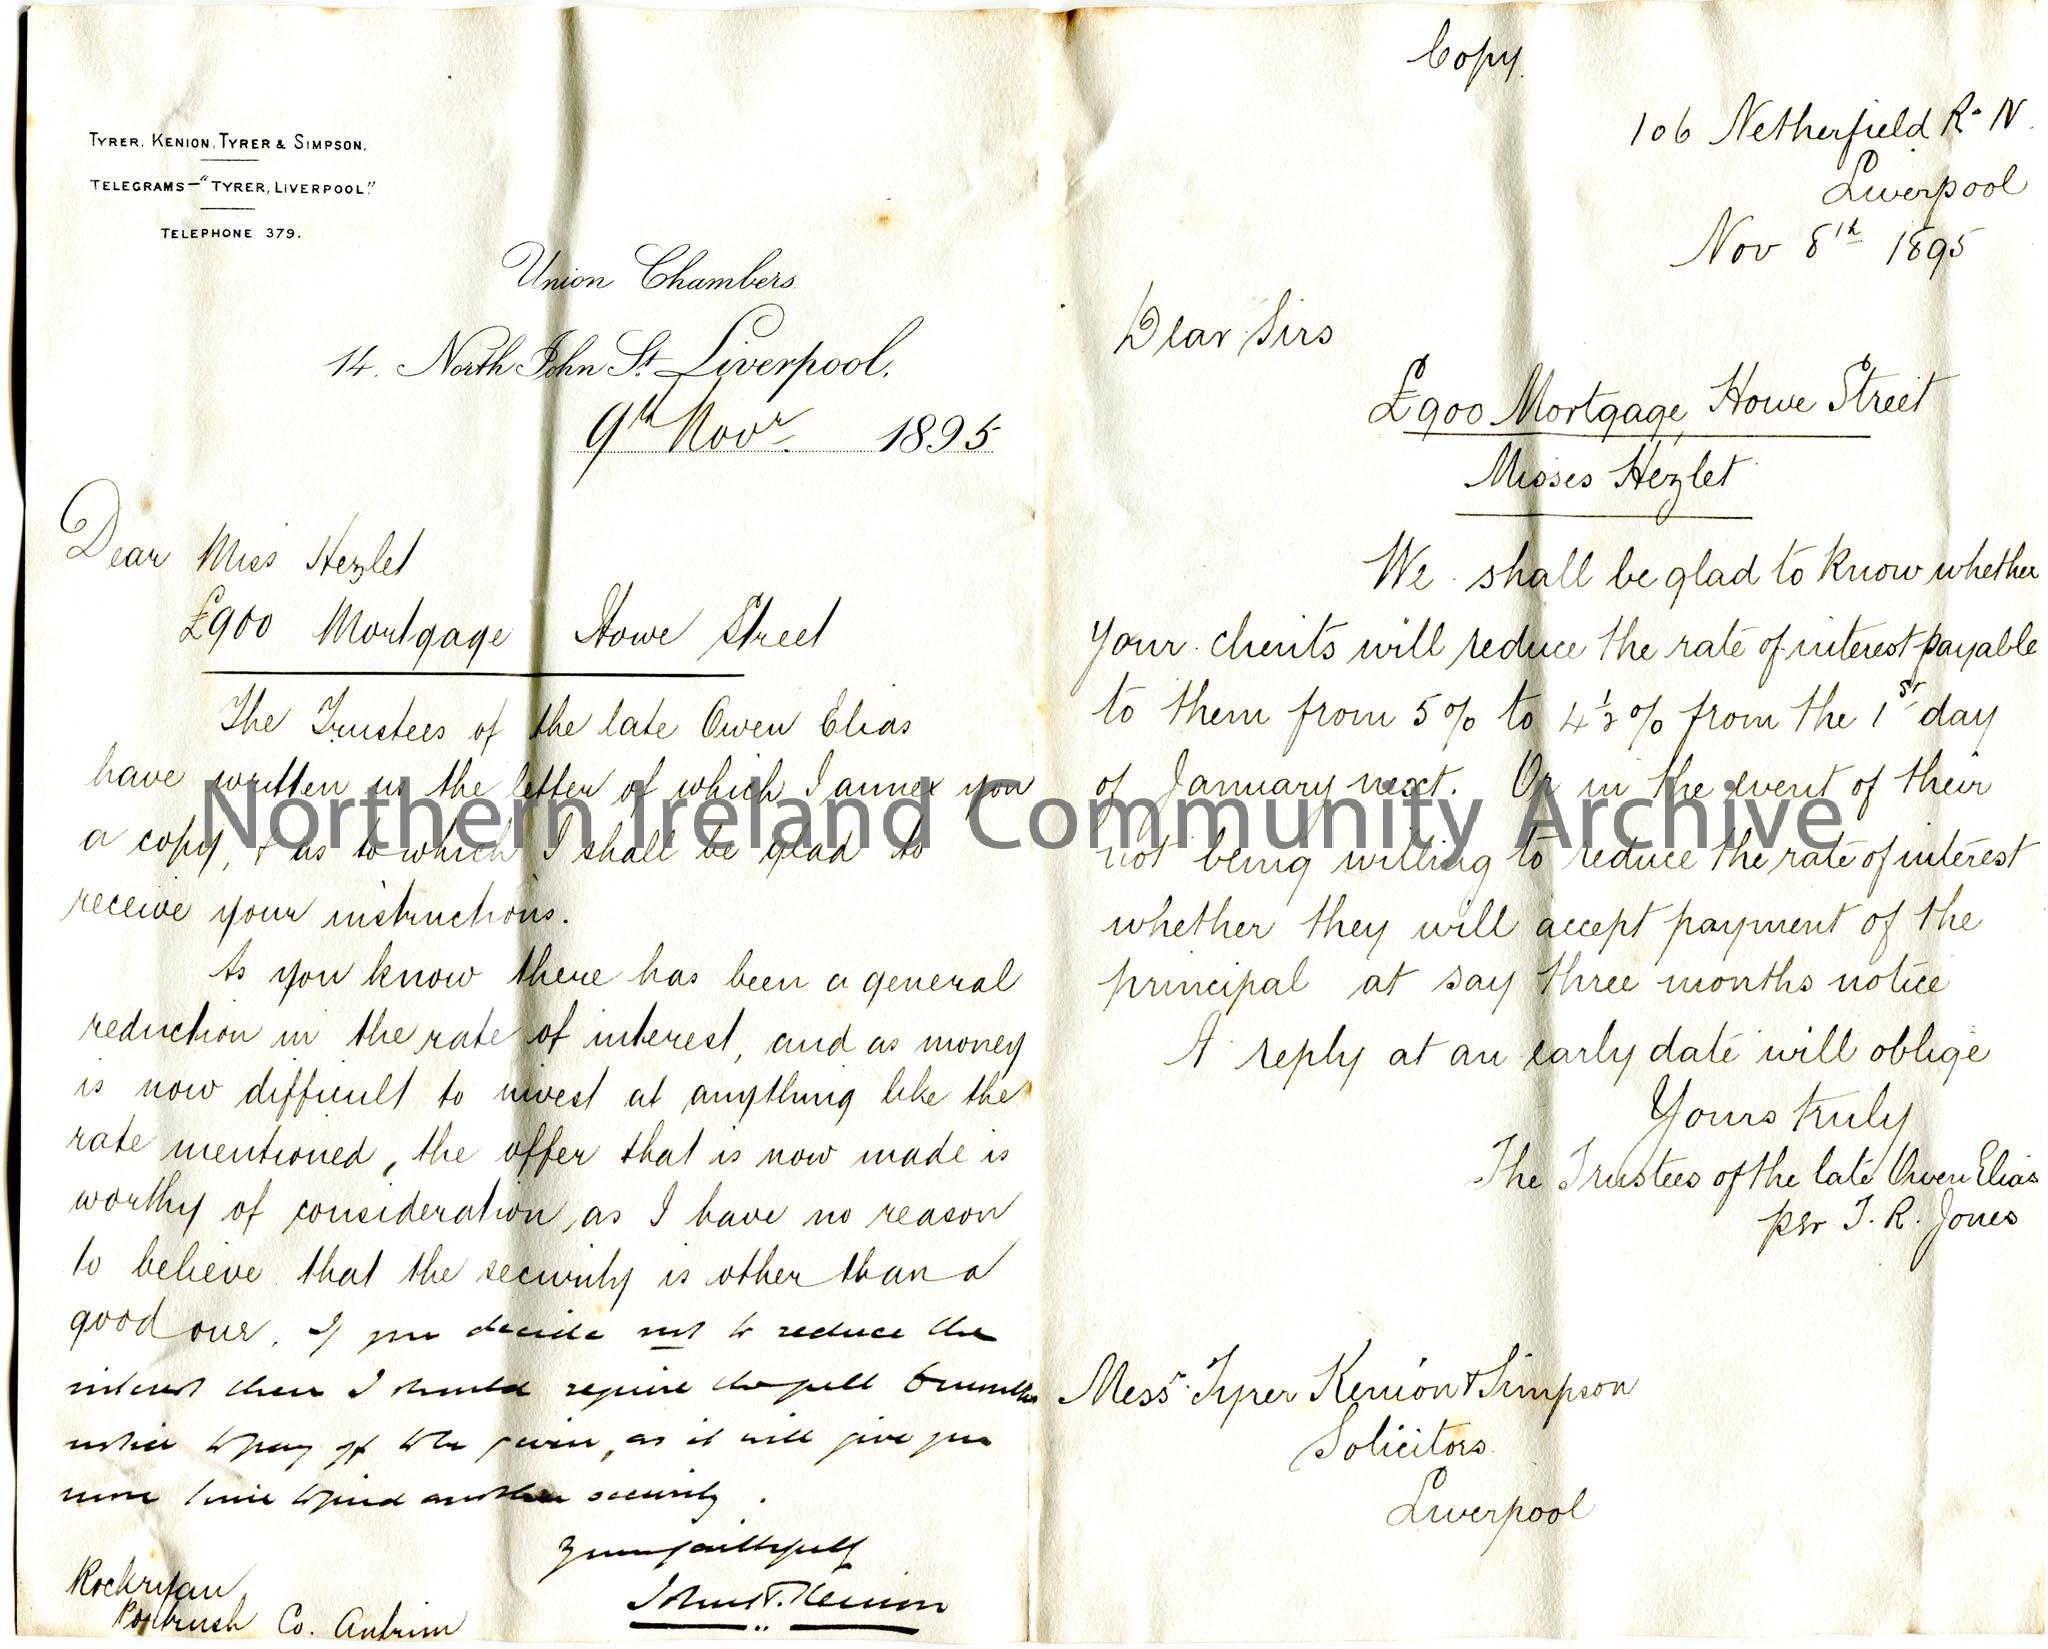 Handwritten letter to Miss Hezlet at Rockryan, Portrush, Co.Antrim. Re £900 Mortgage Howe Street? They are looking instruction from Miss Hezlet t…